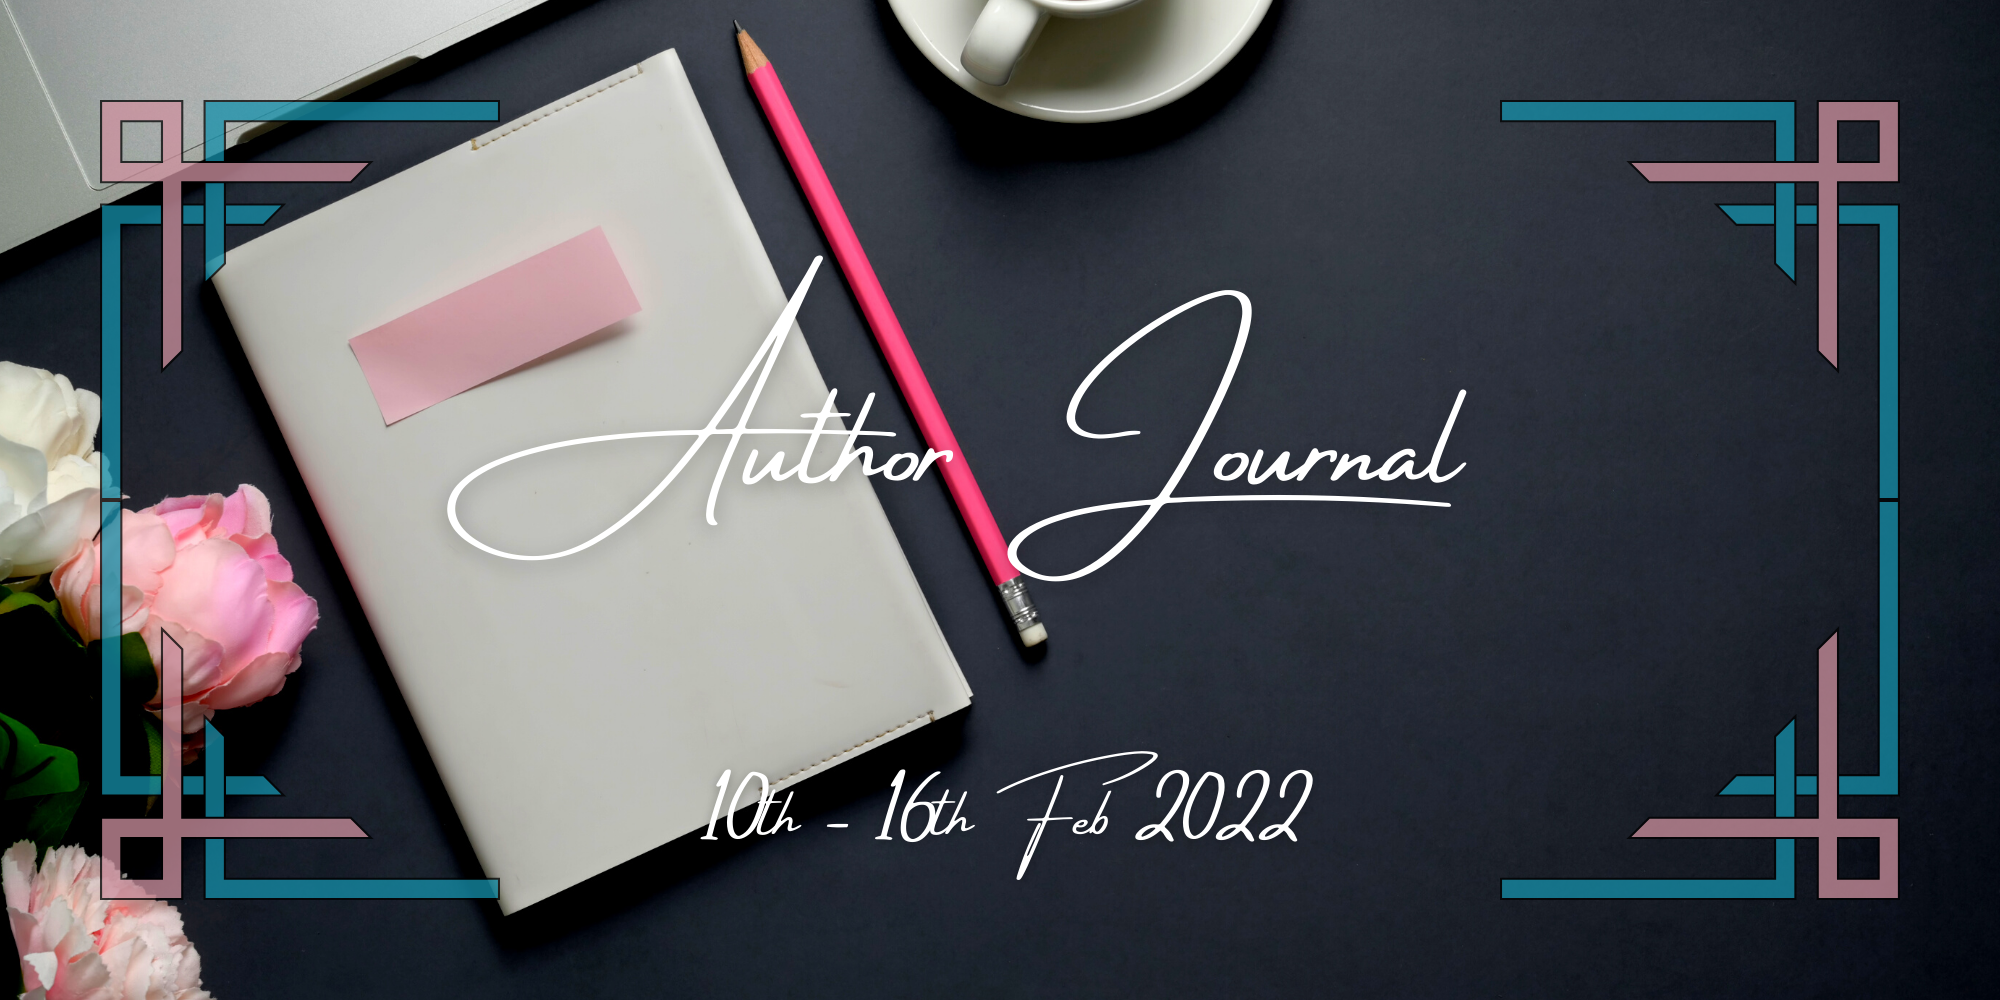 Author Journal 10th – 16th February  2022